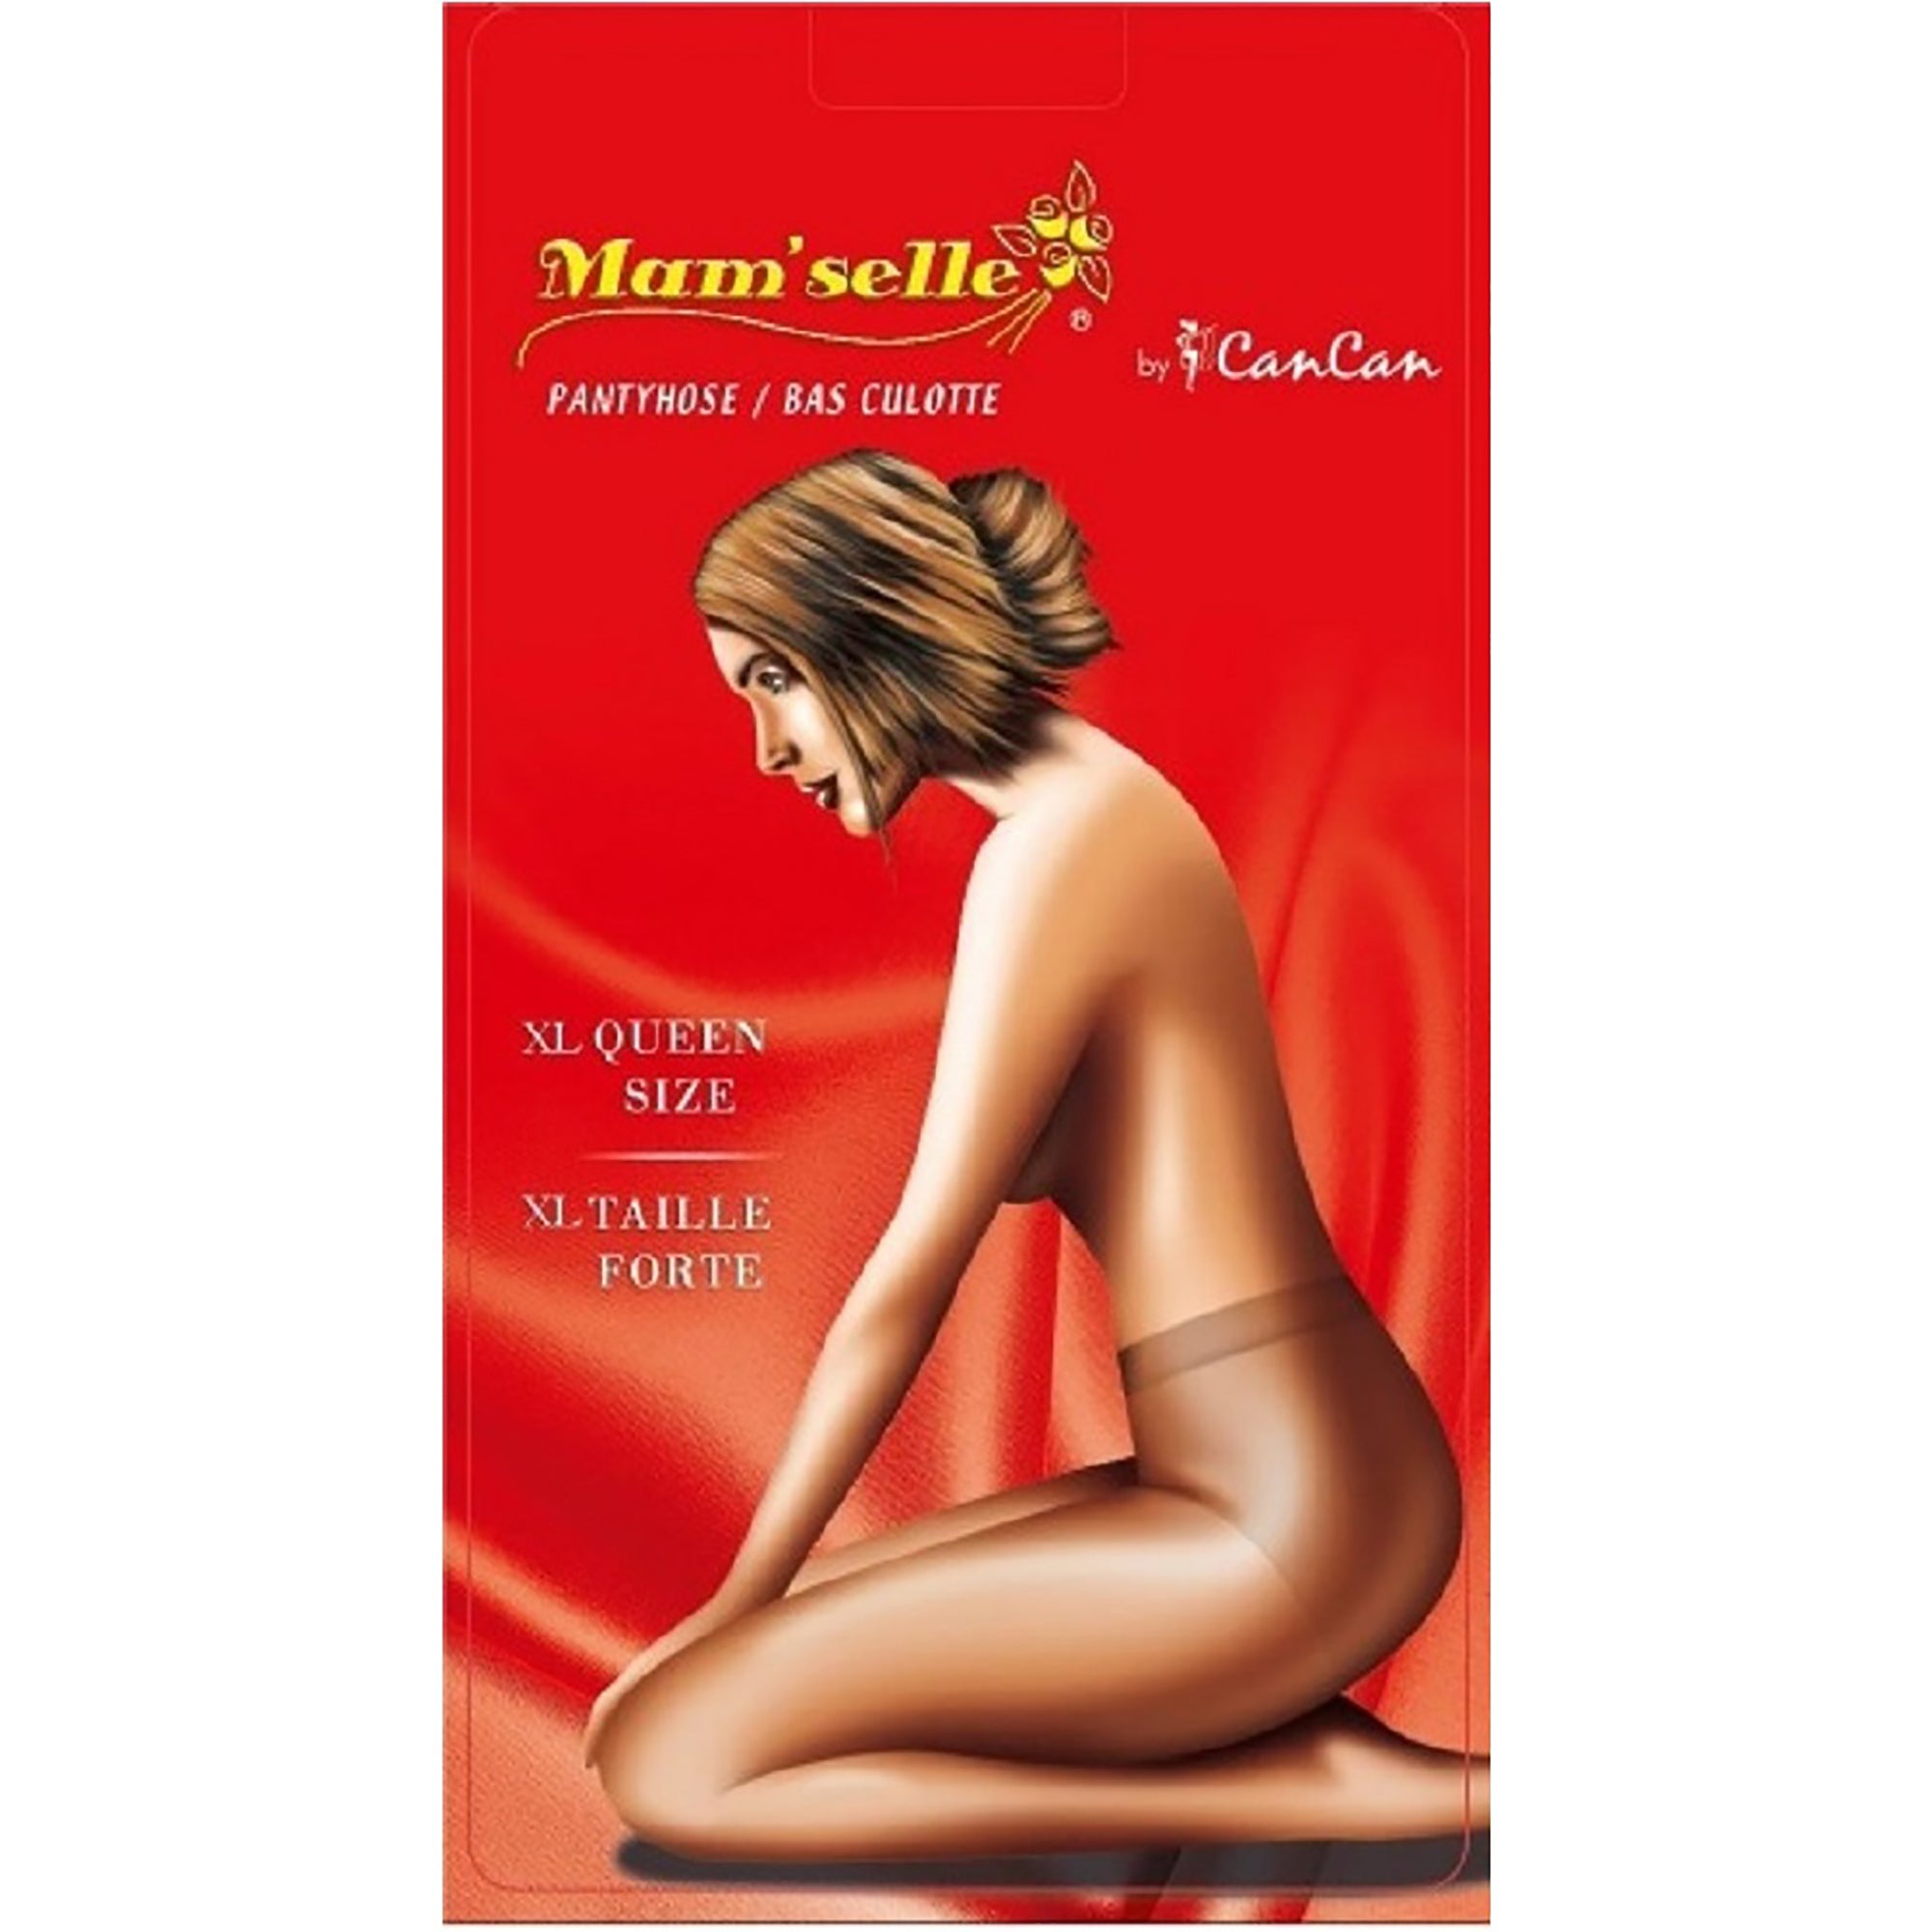 Mam'selle Panty Hose - Taupe 20 Denier - XL Queen Size (200-260lbs)